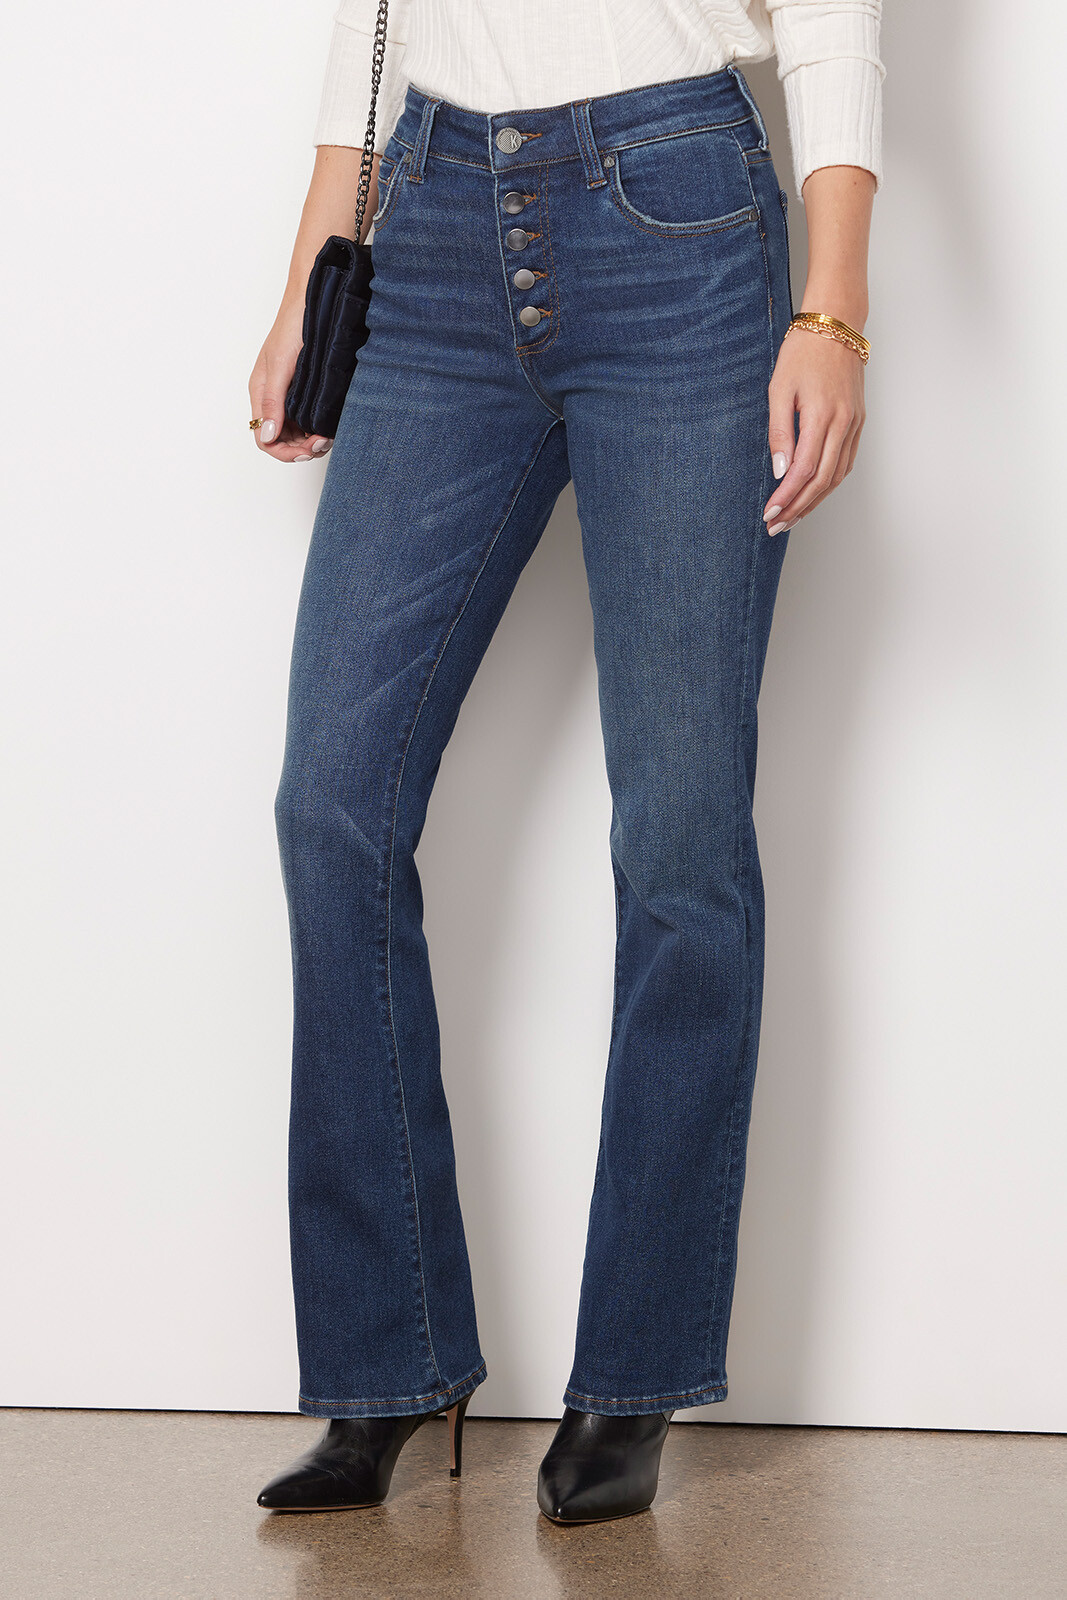 Kut From The Kloth Natalie Bootcut Jeans Size 8